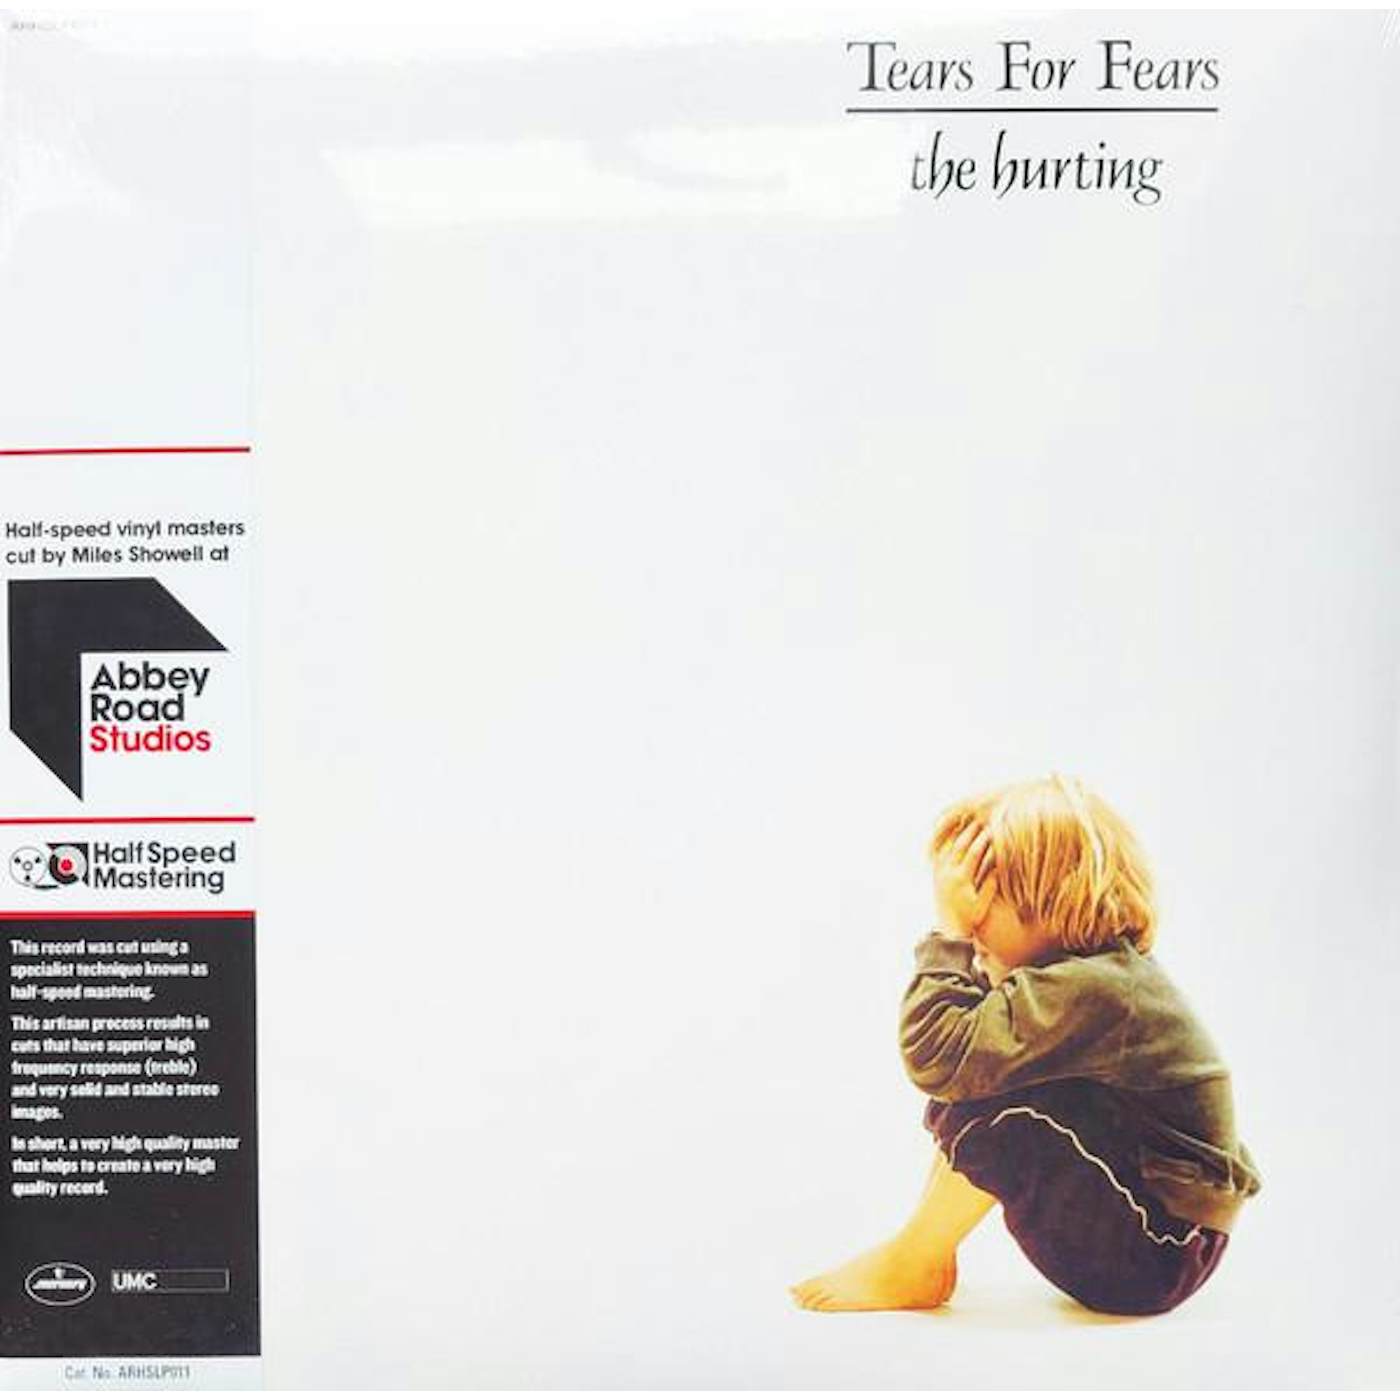 Tears For Fears HURTING (HALF-SPEED LP) Vinyl Record